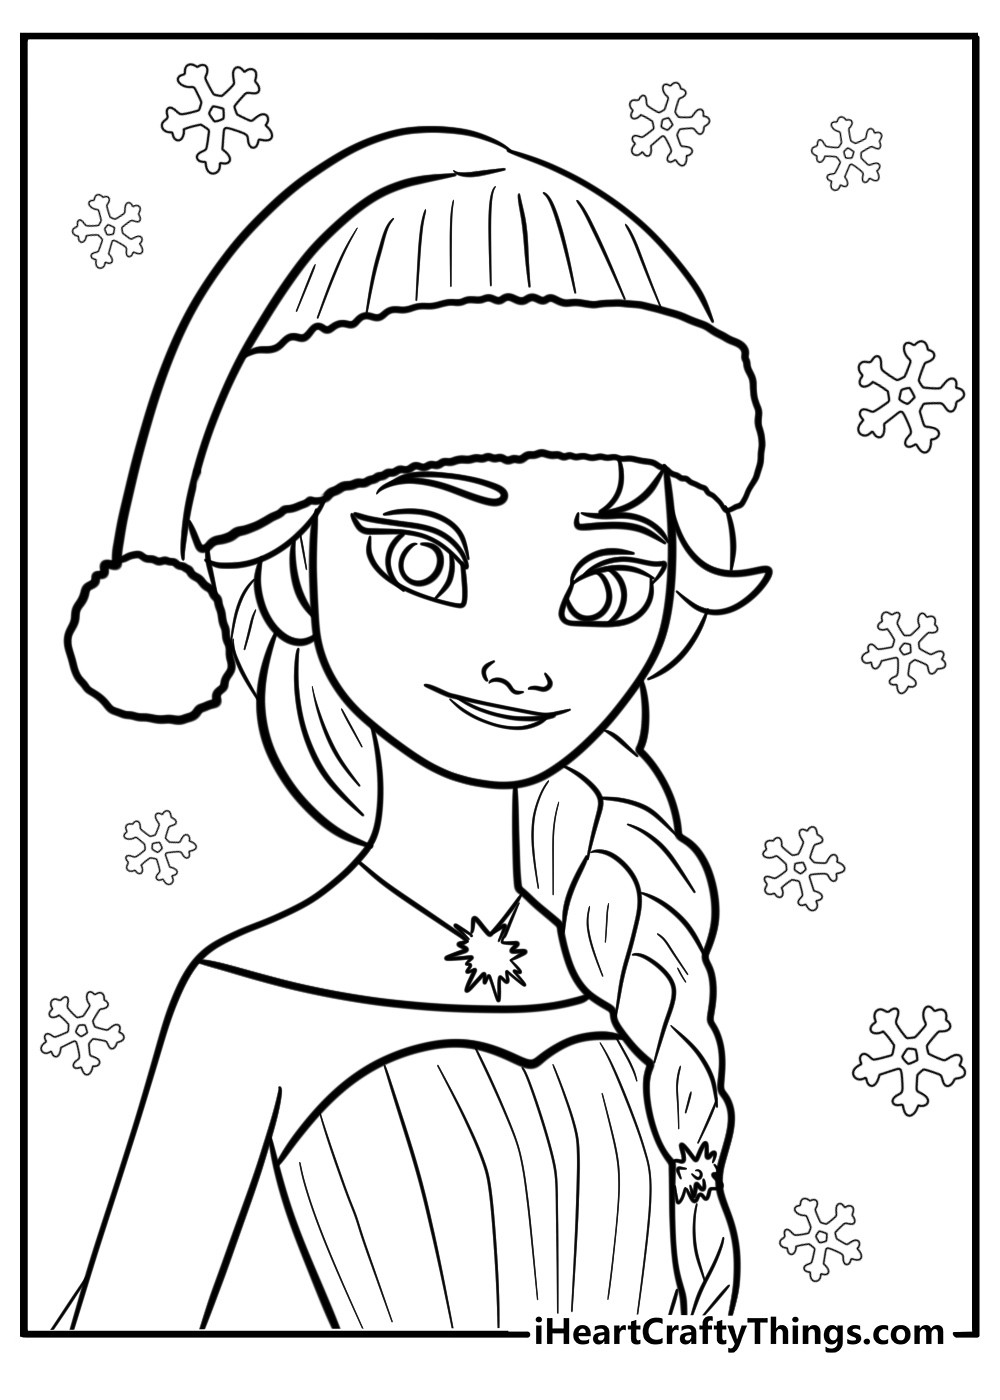 Christmas frozen coloring pages